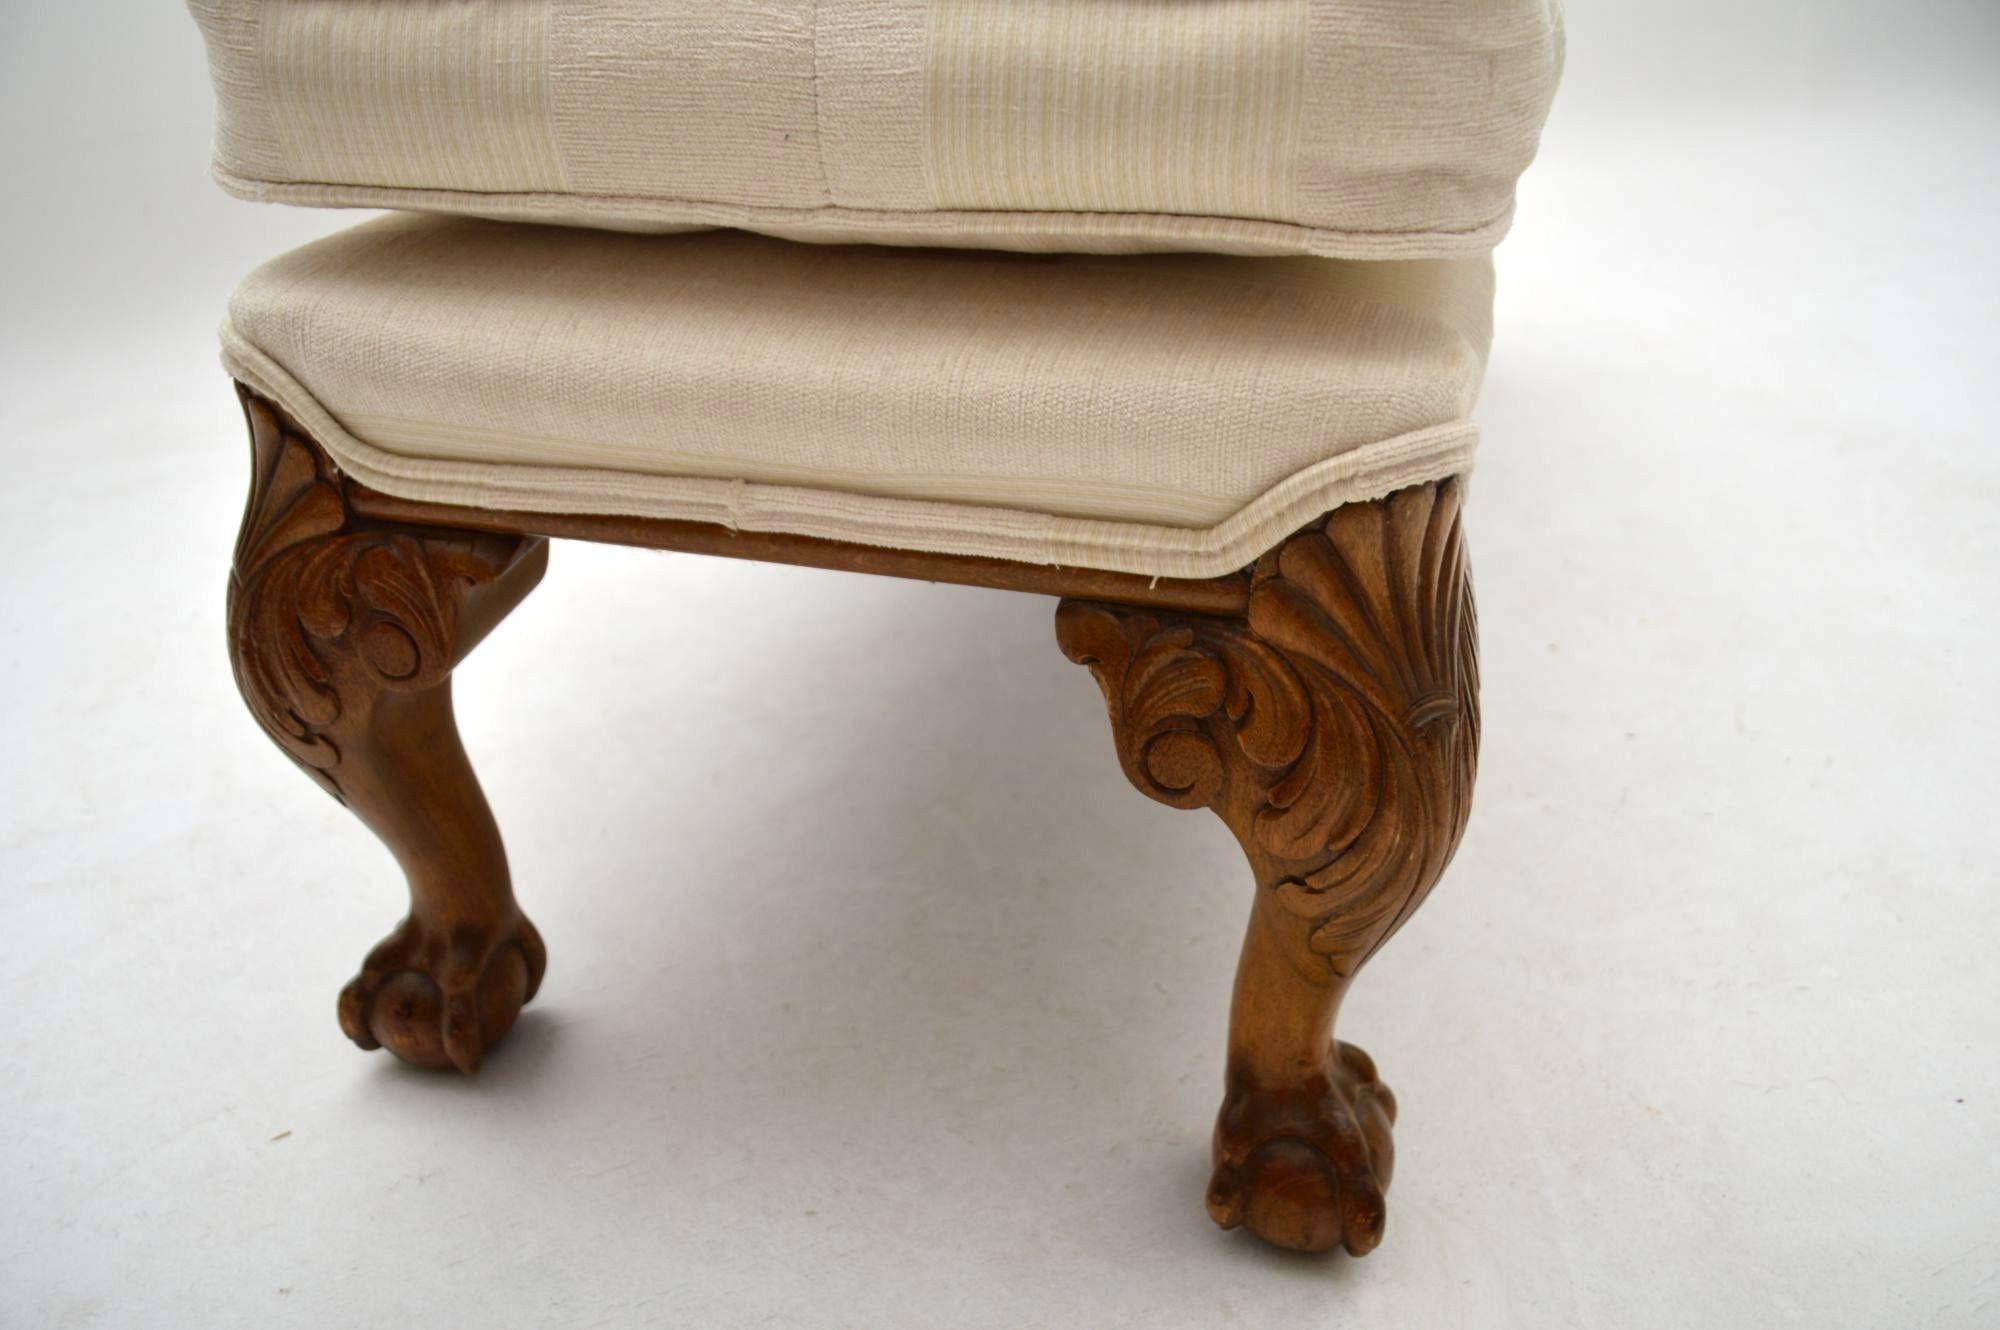 Early 20th Century Antique Carved Walnut Upholstered Foot Stool